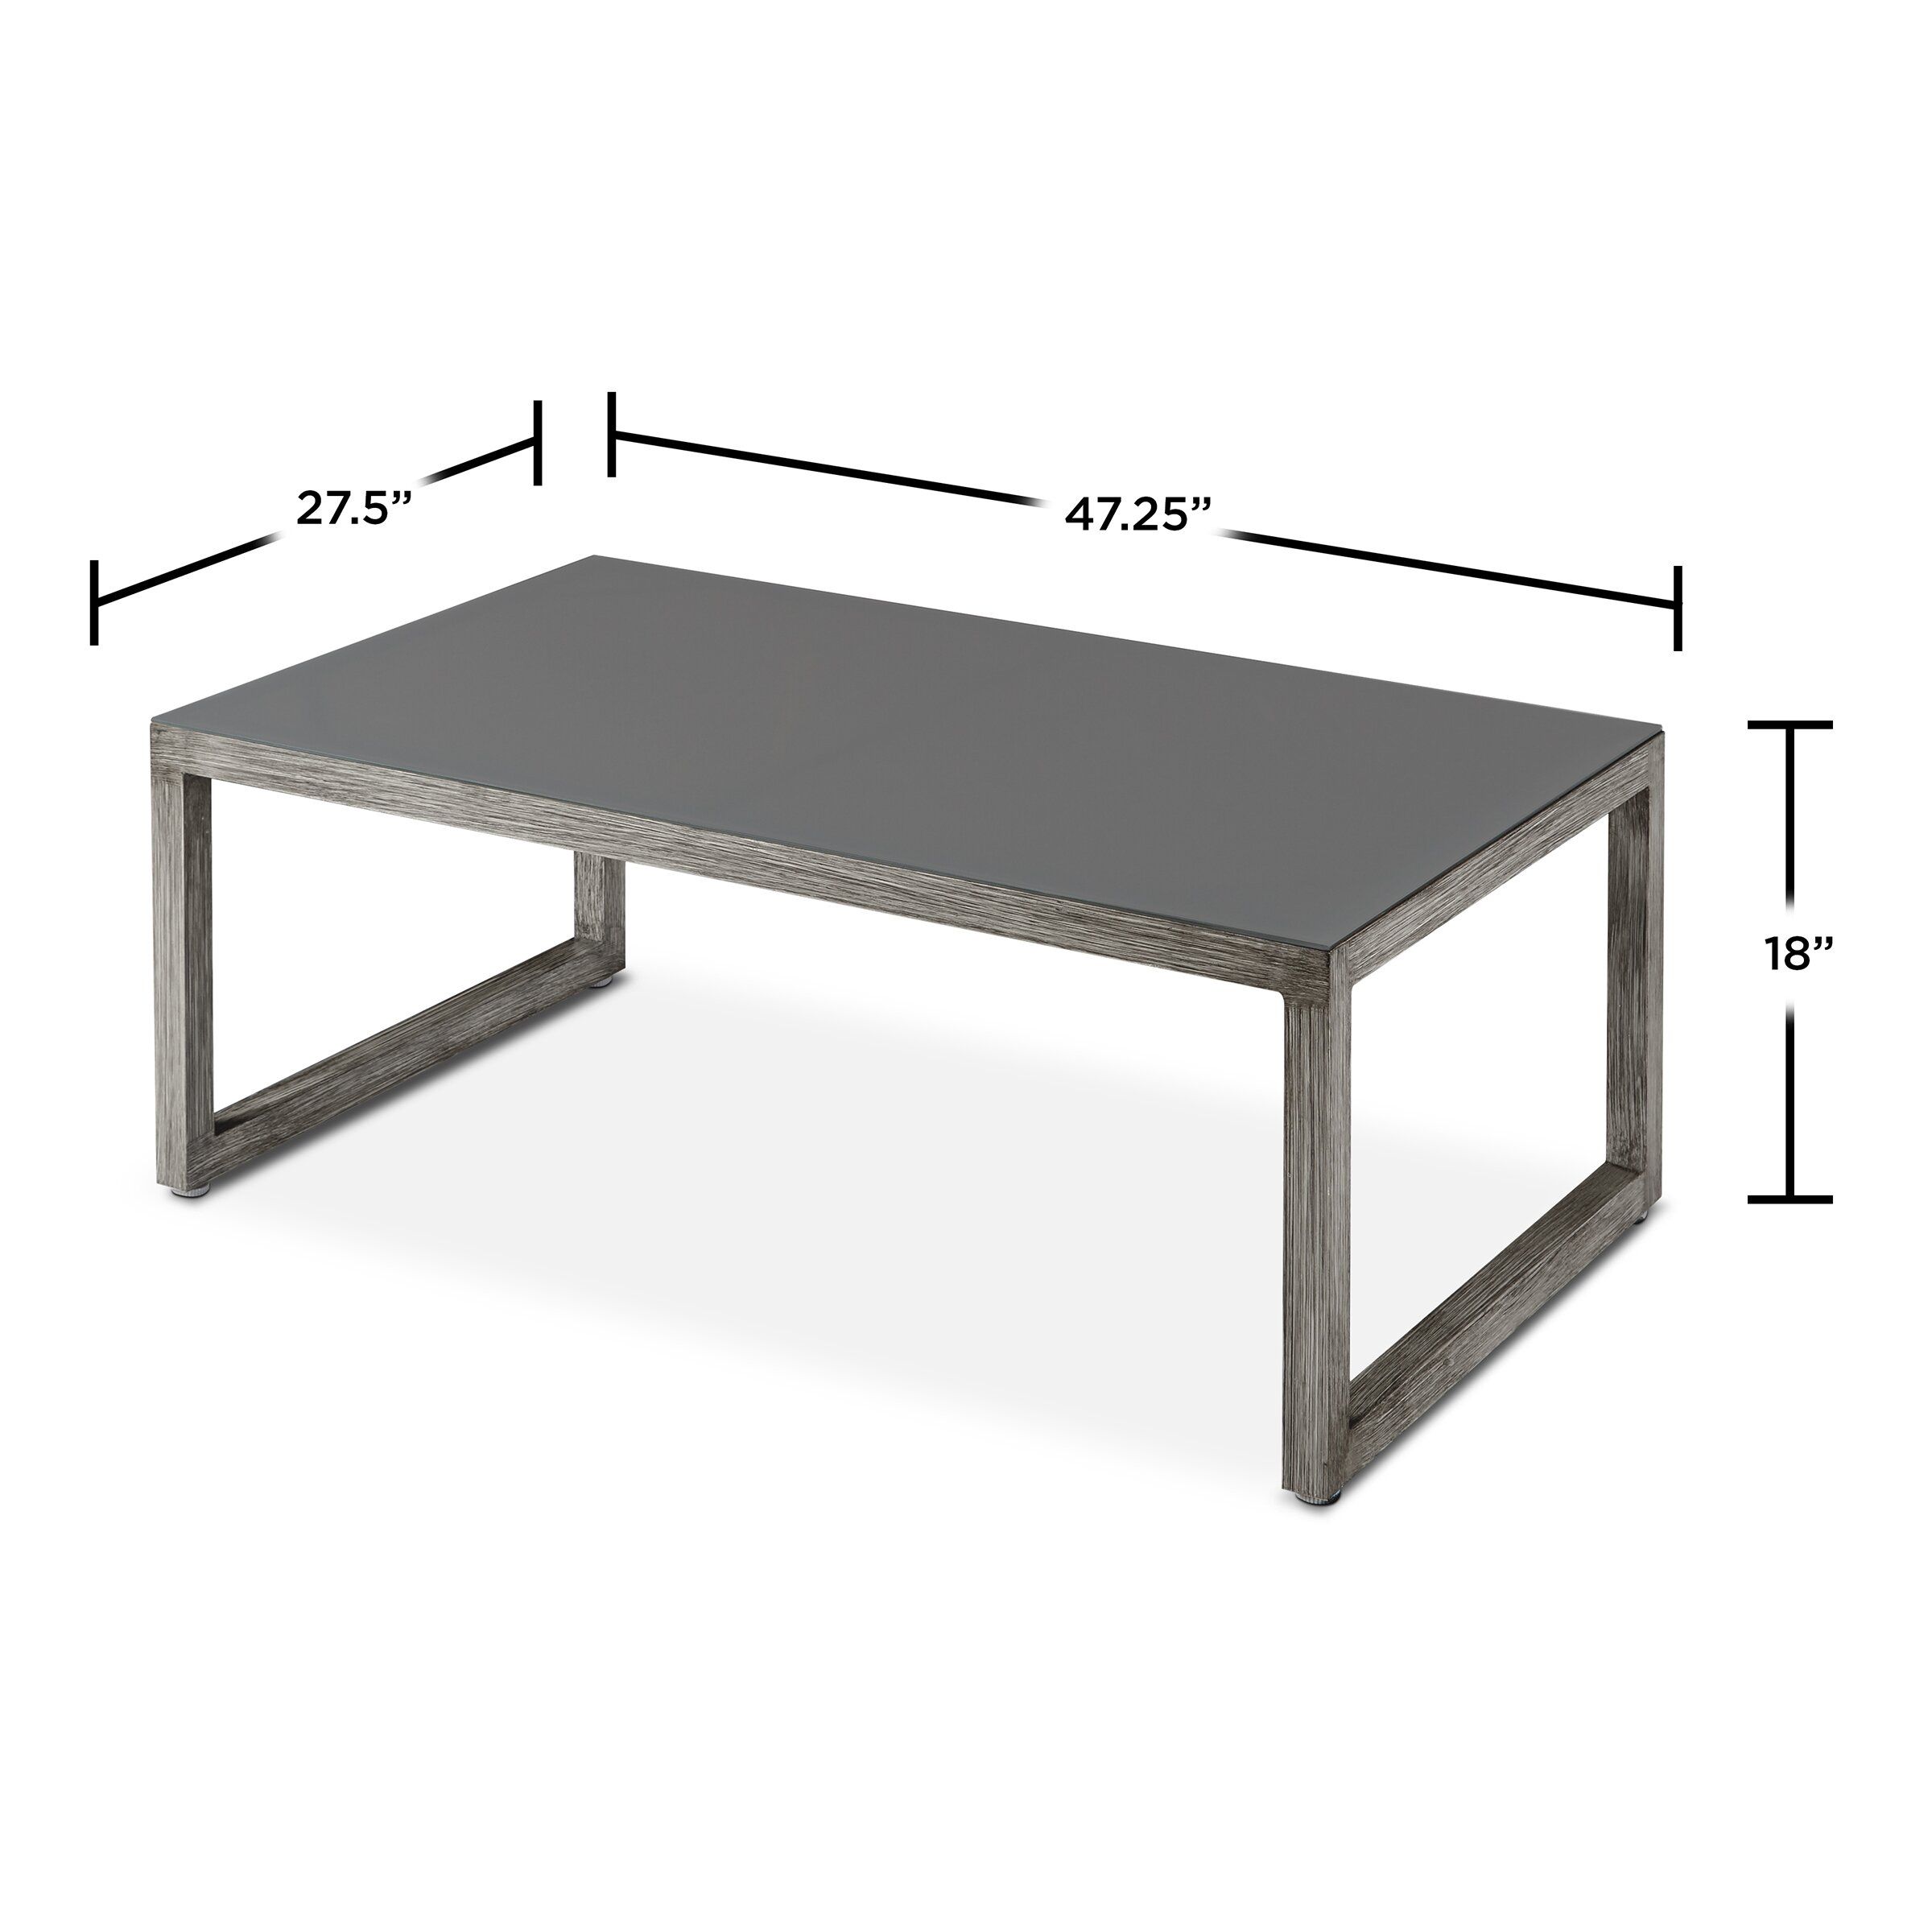 Real Flame Monaco Coffee Table | Wayfair For Monaco Round Coffee Tables (Gallery 8 of 20)